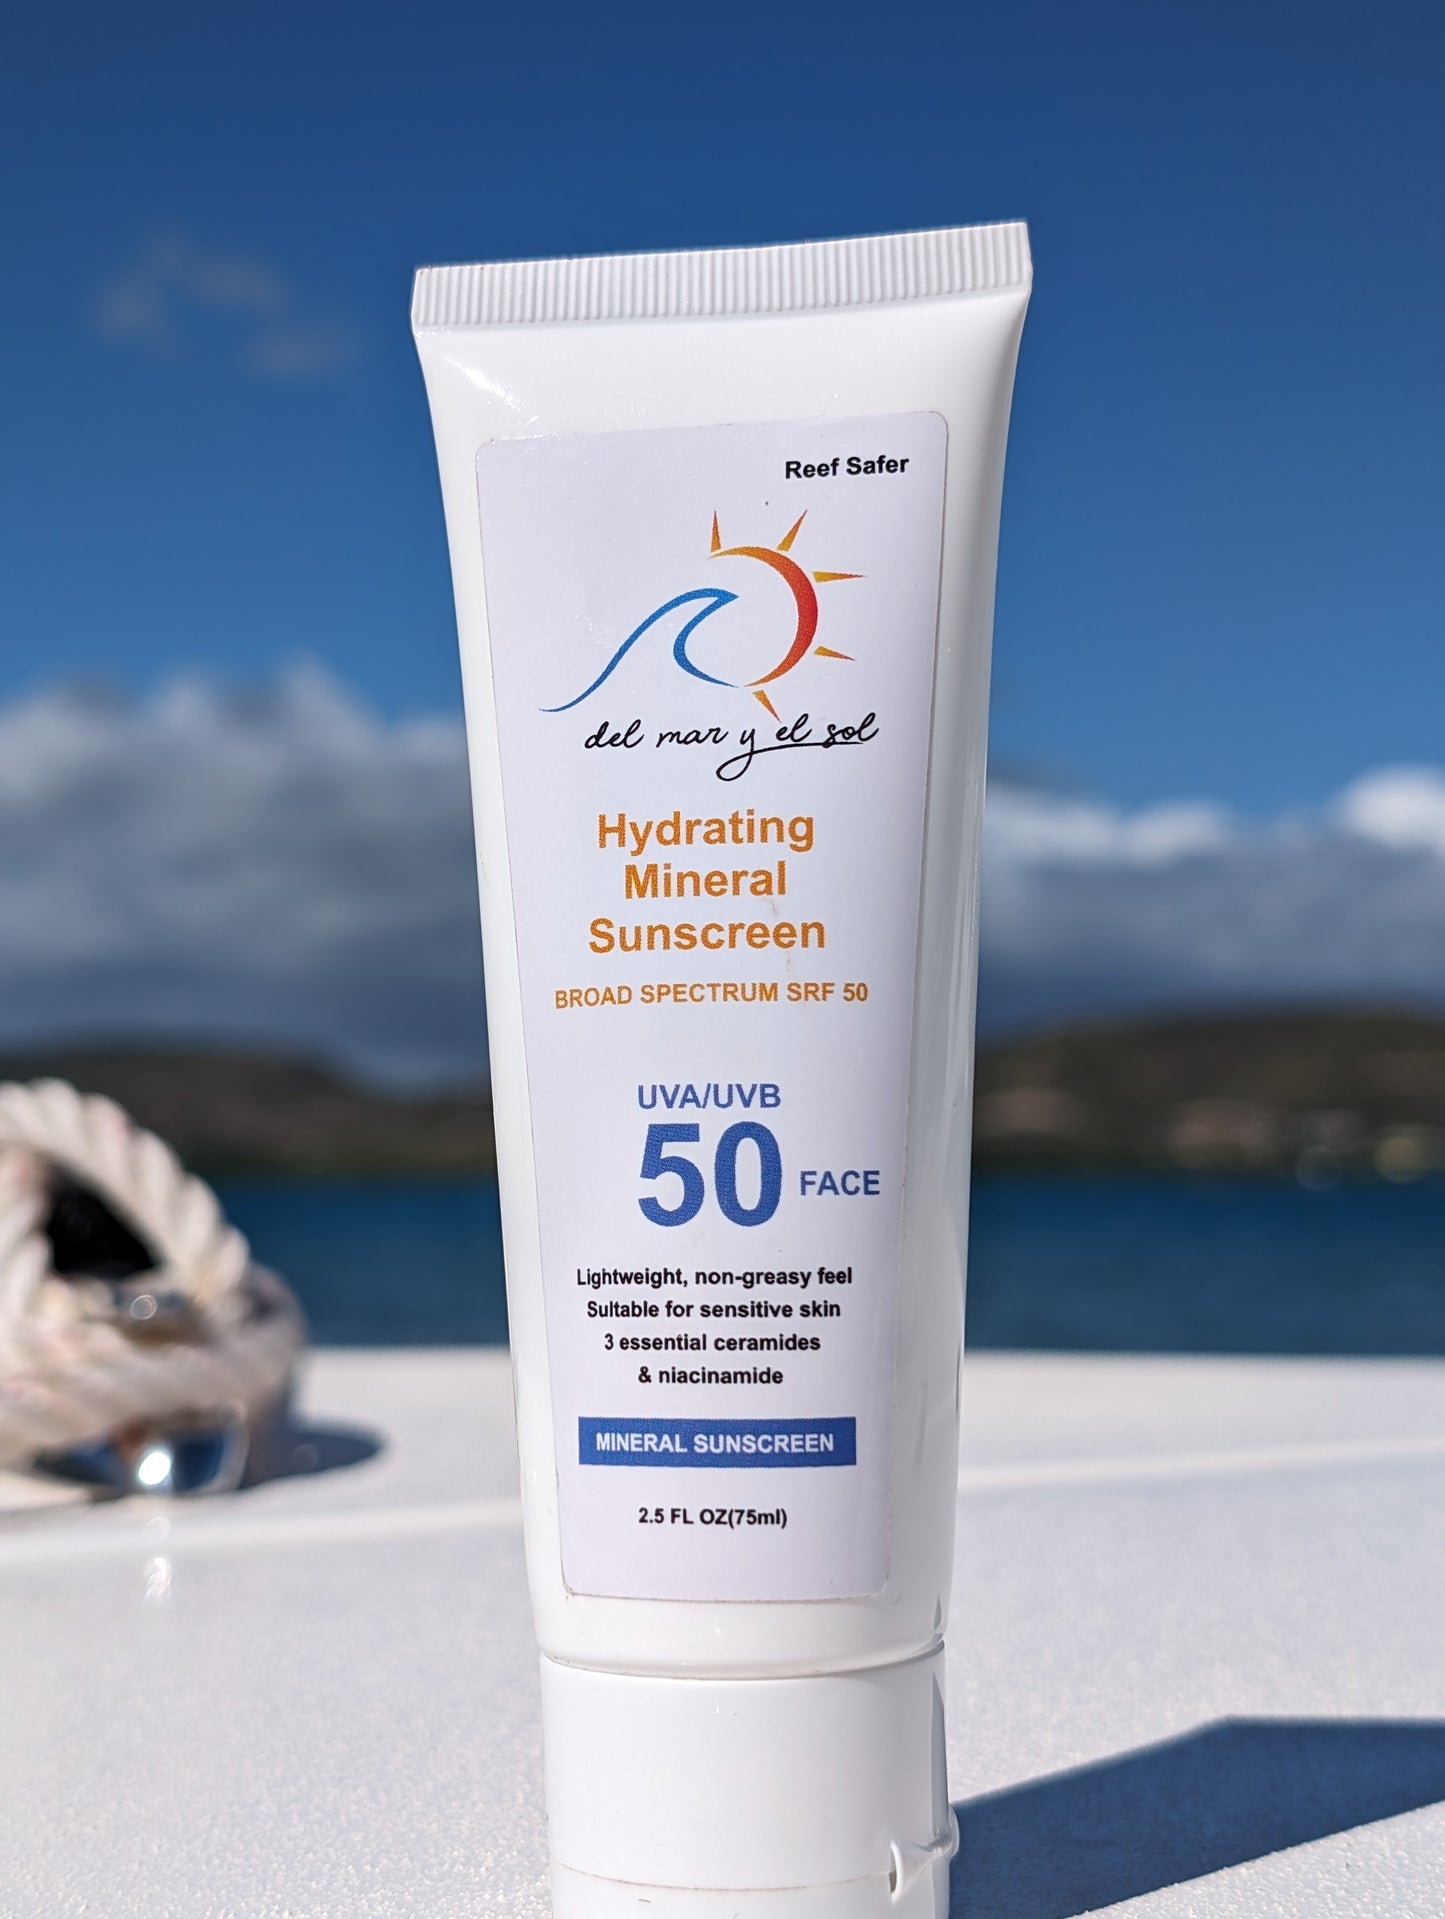 Close-up of Del Mar y el Sol SPF 50 Face Sunscreen on boat deck with nautical ropes and sea in the background.